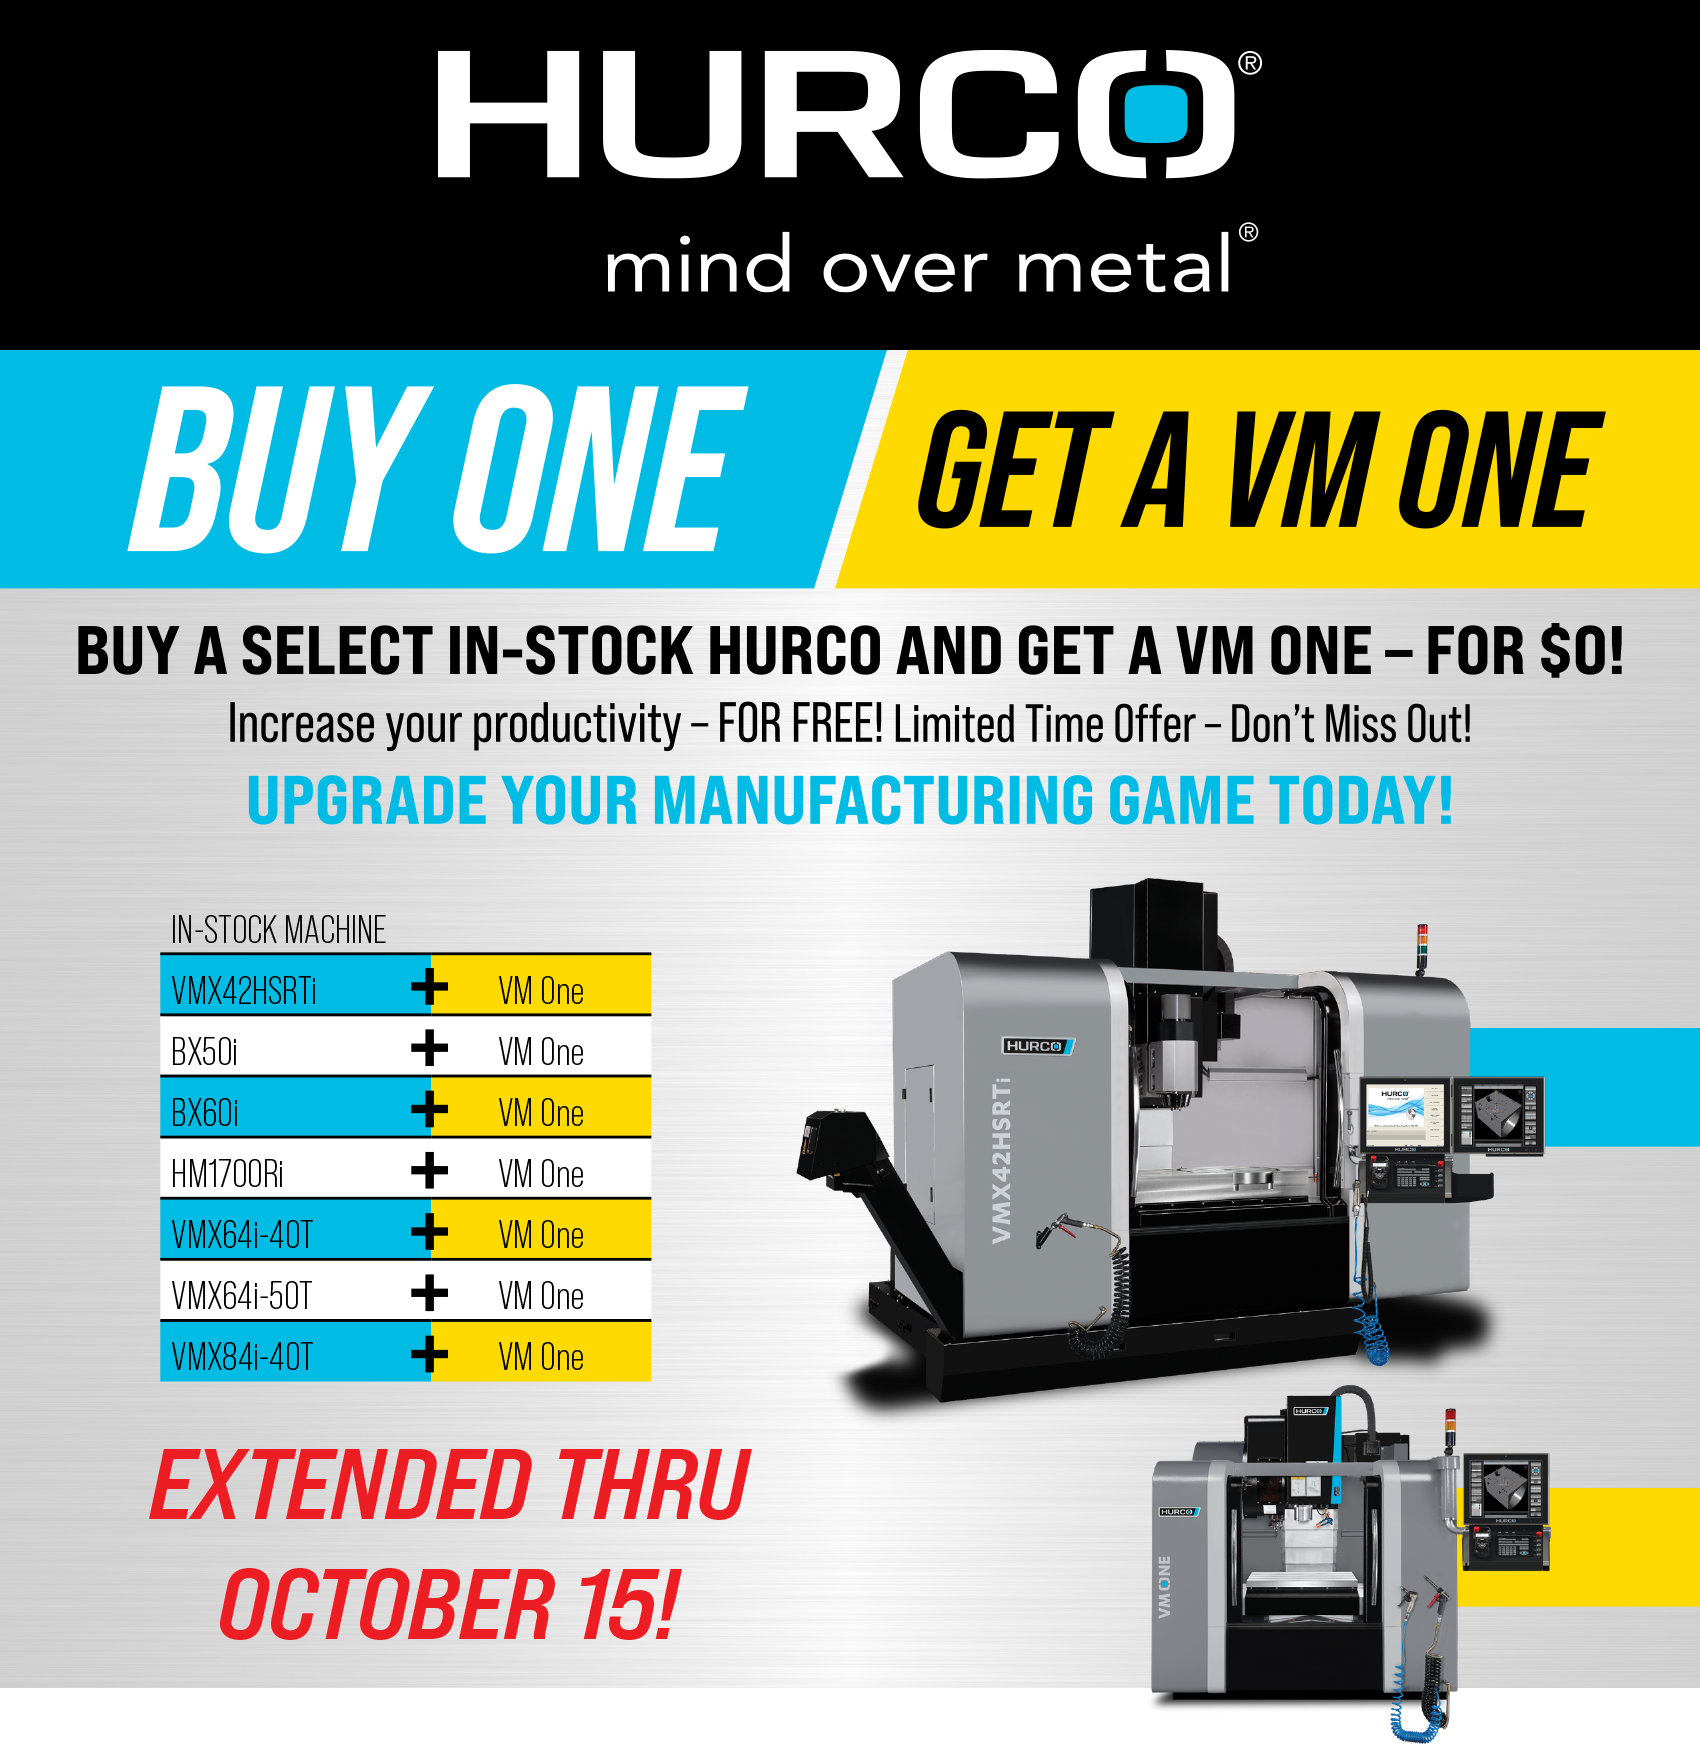 Hurco_Buy-One_Get-a-VM-One_Extended-October-15-1